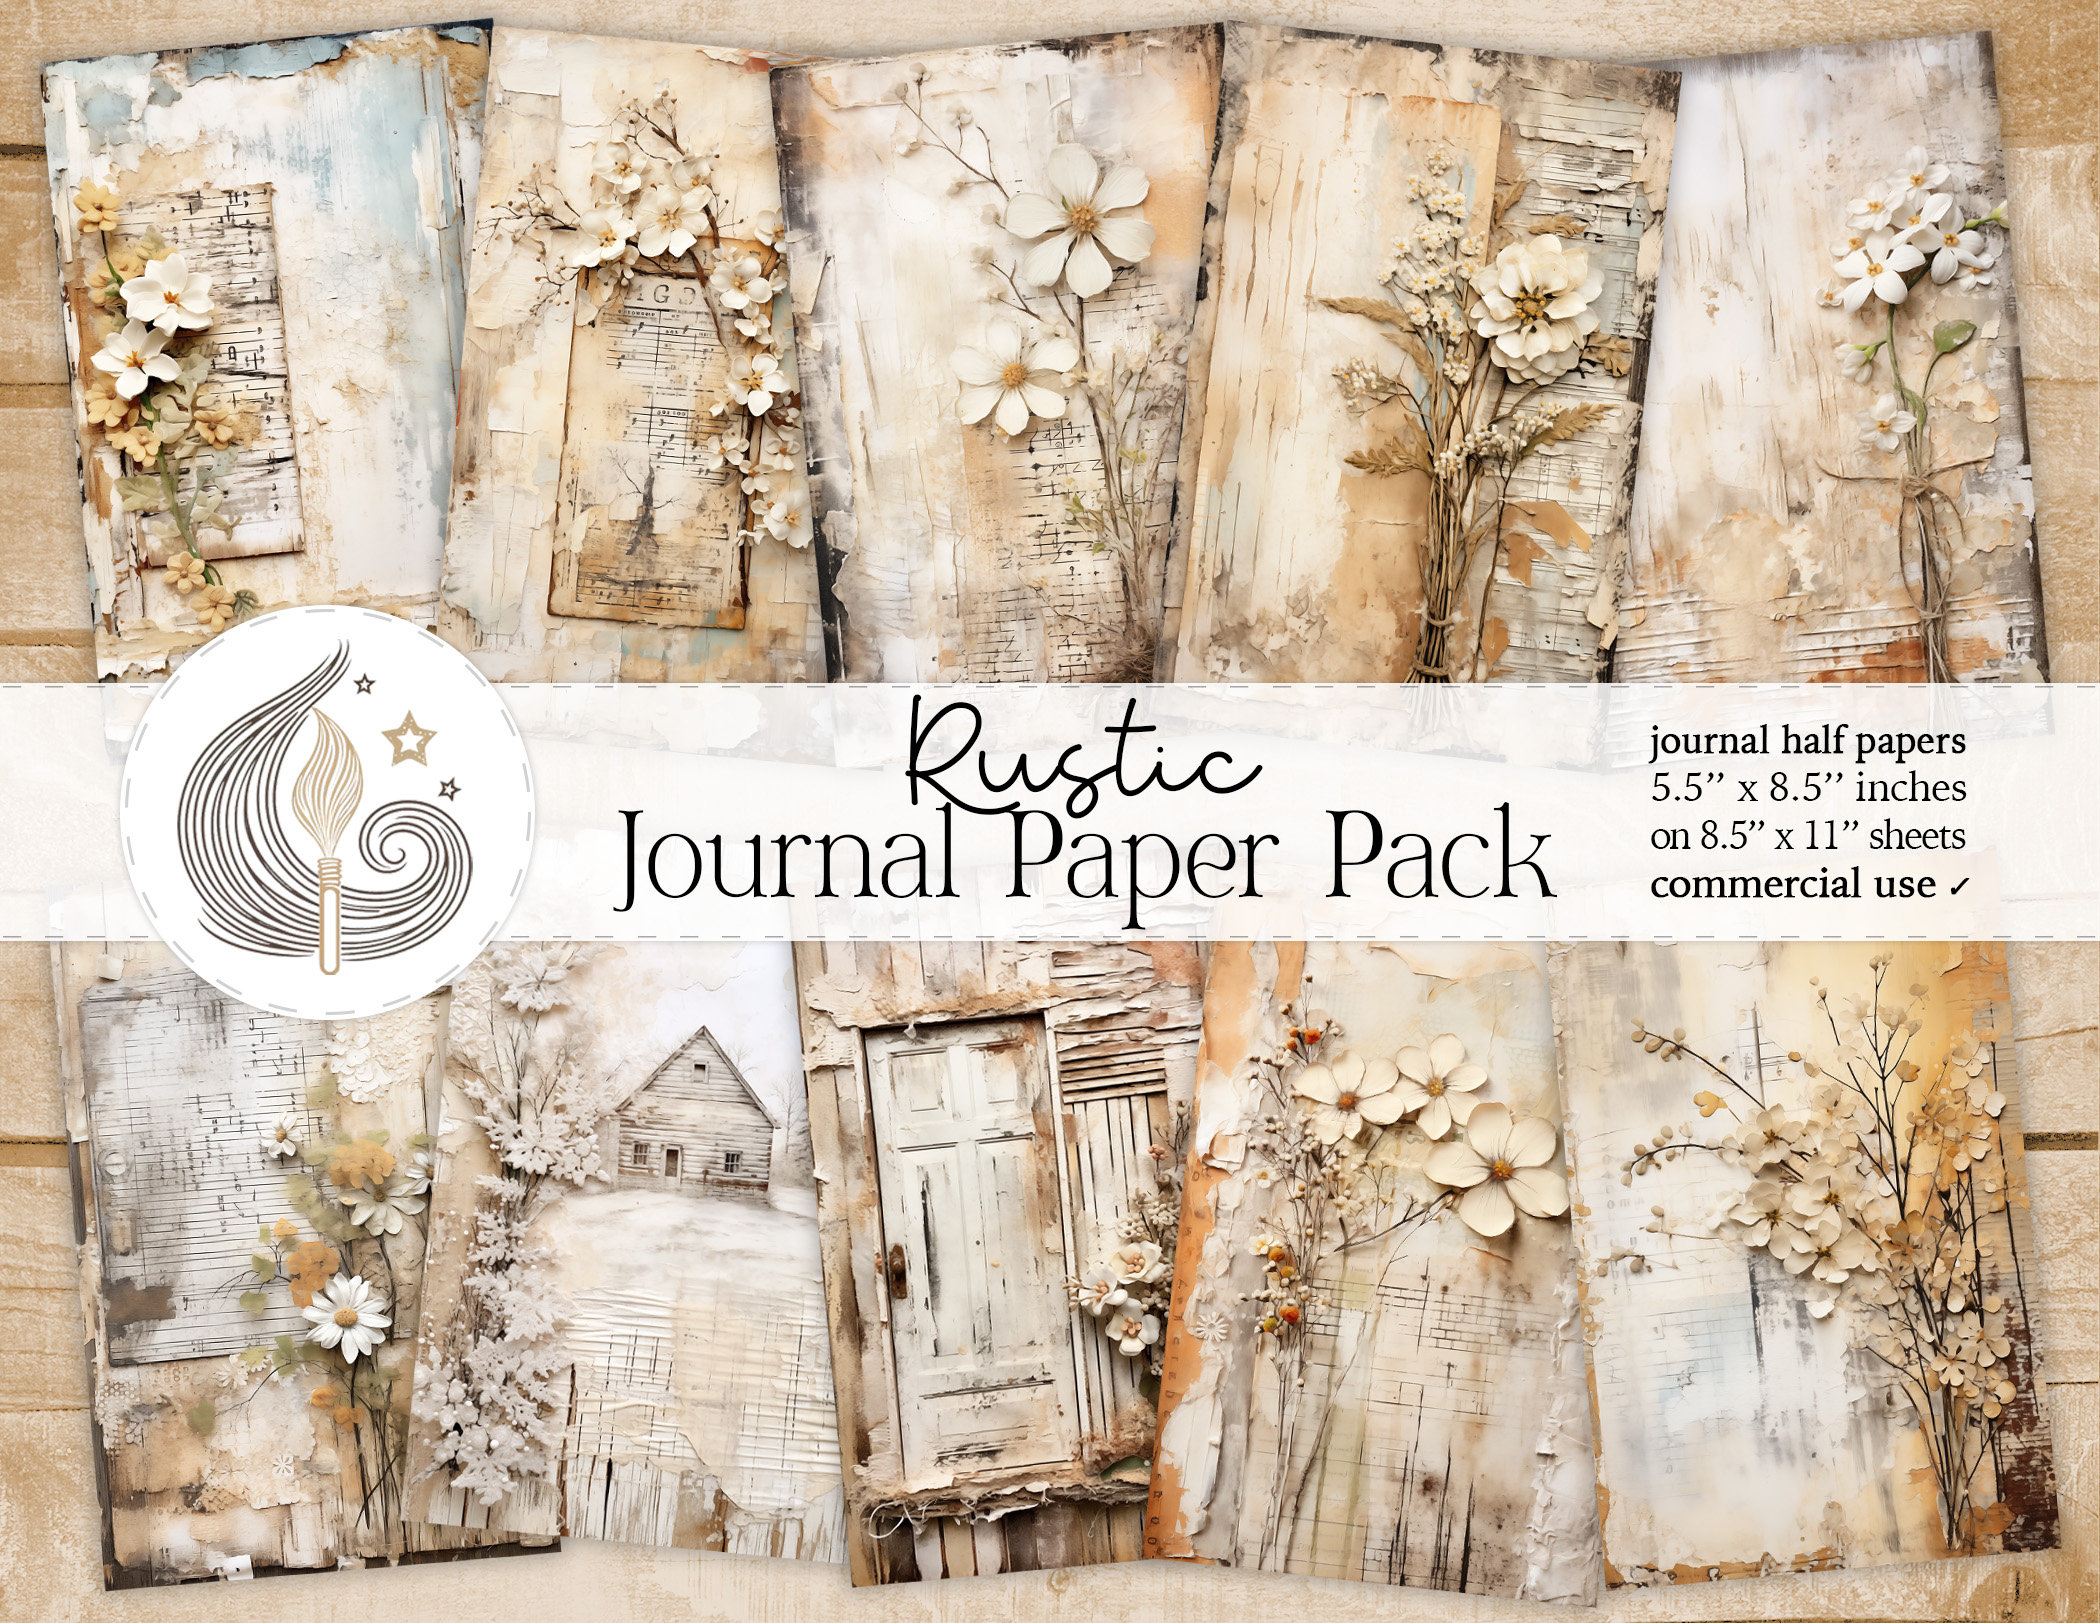 Vintage Page Holder Journal Clips to Hold Journal Open While